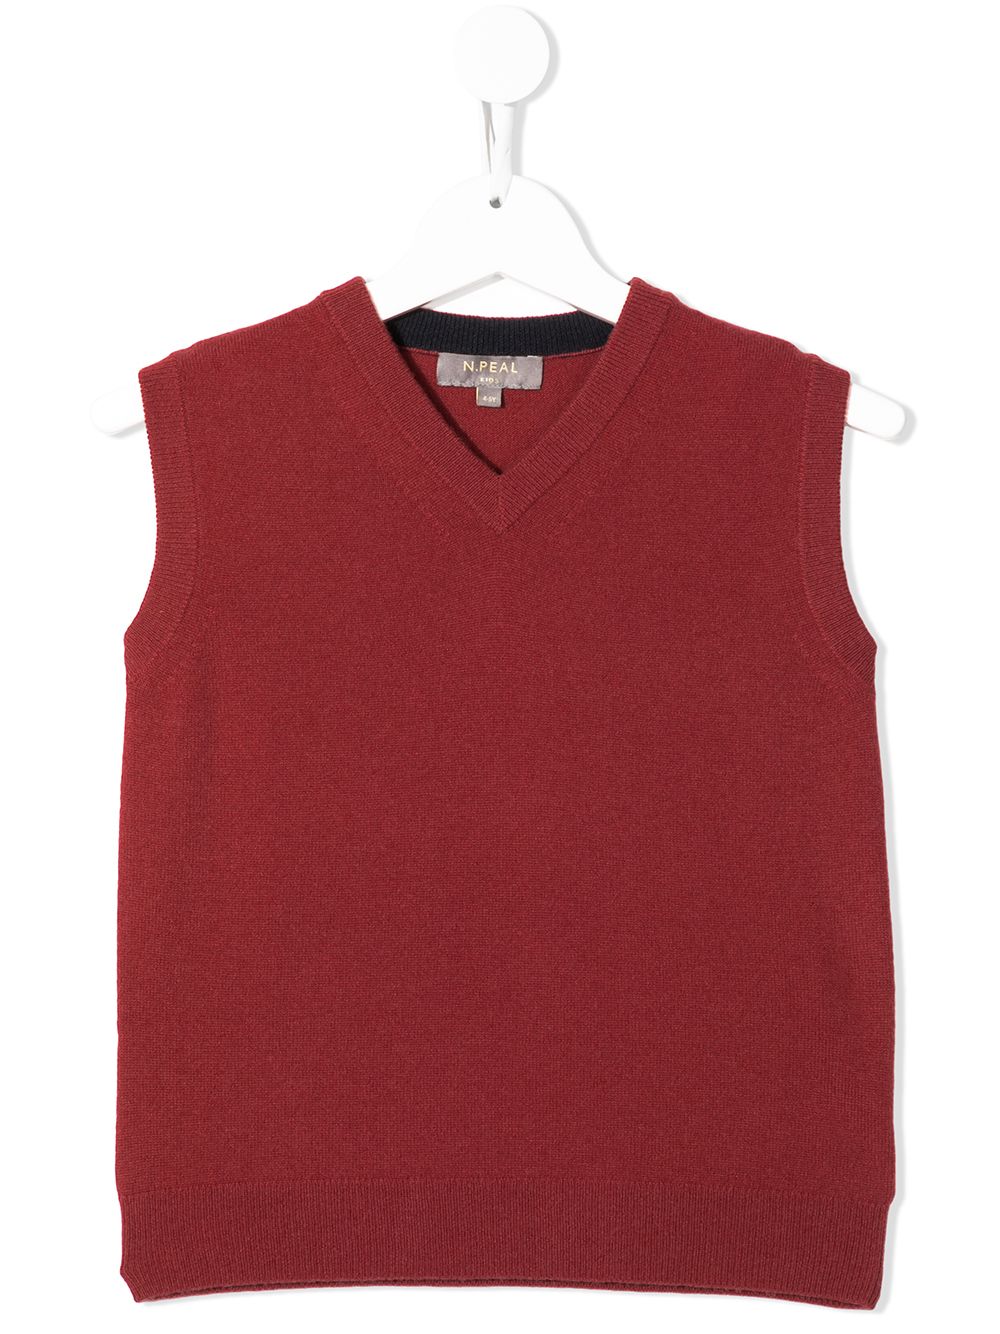 Image 1 of N.PEAL KIDS organic cashmere knitted vest top